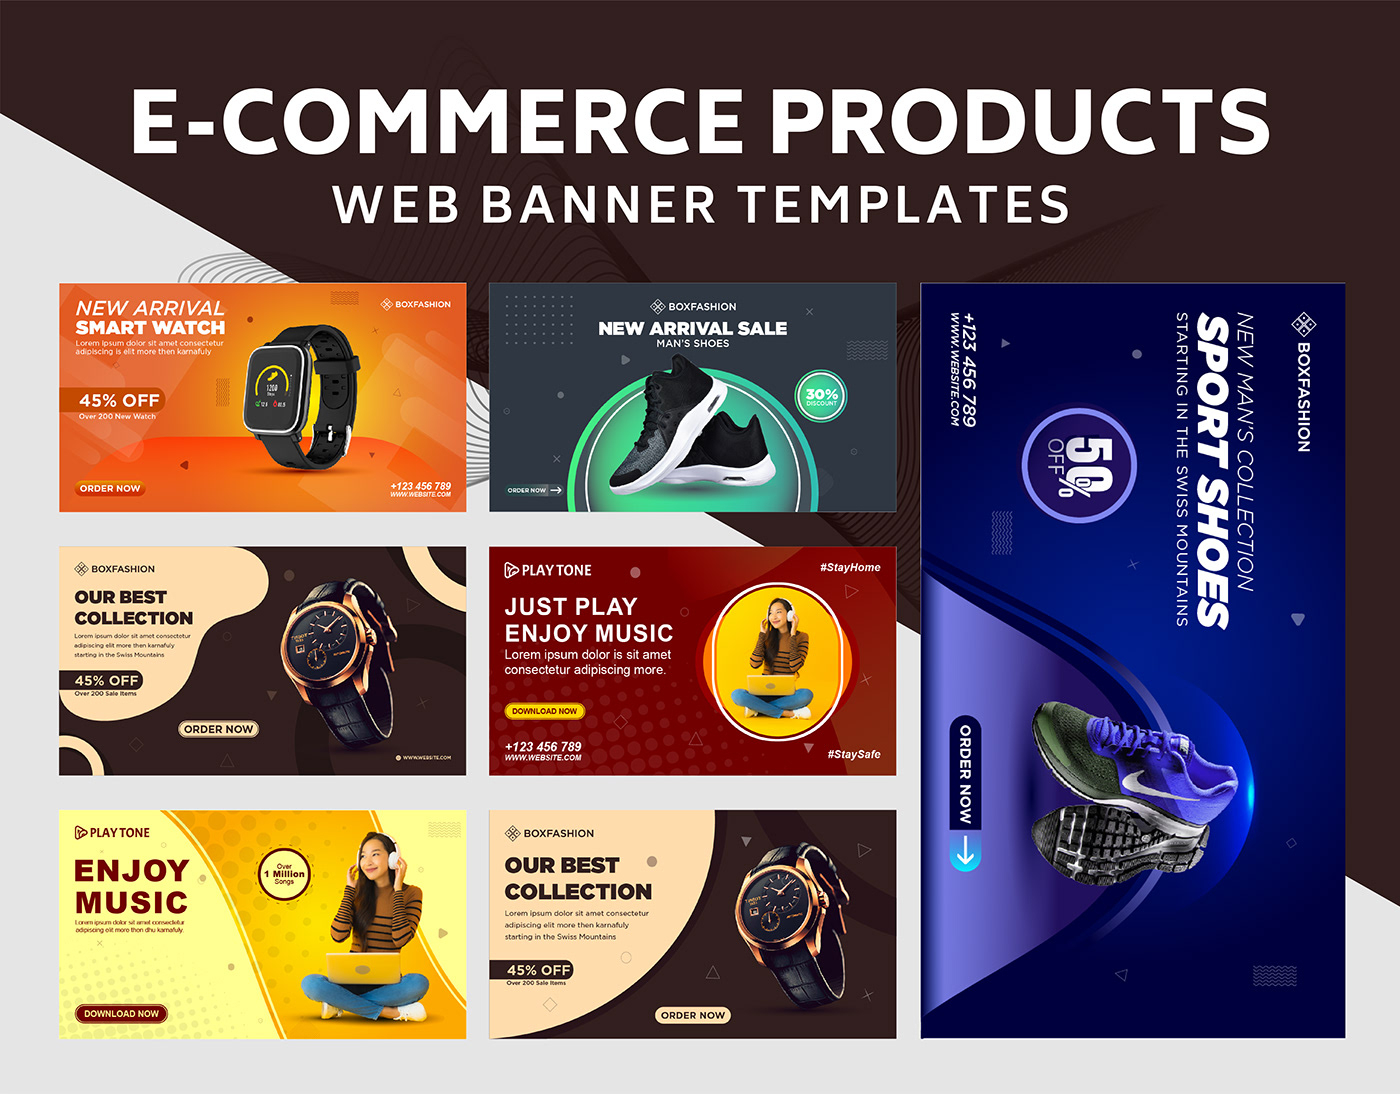 E-Commerce Products Web Banner Template Free Download on Behance Intended For Website Banner Templates Free Download